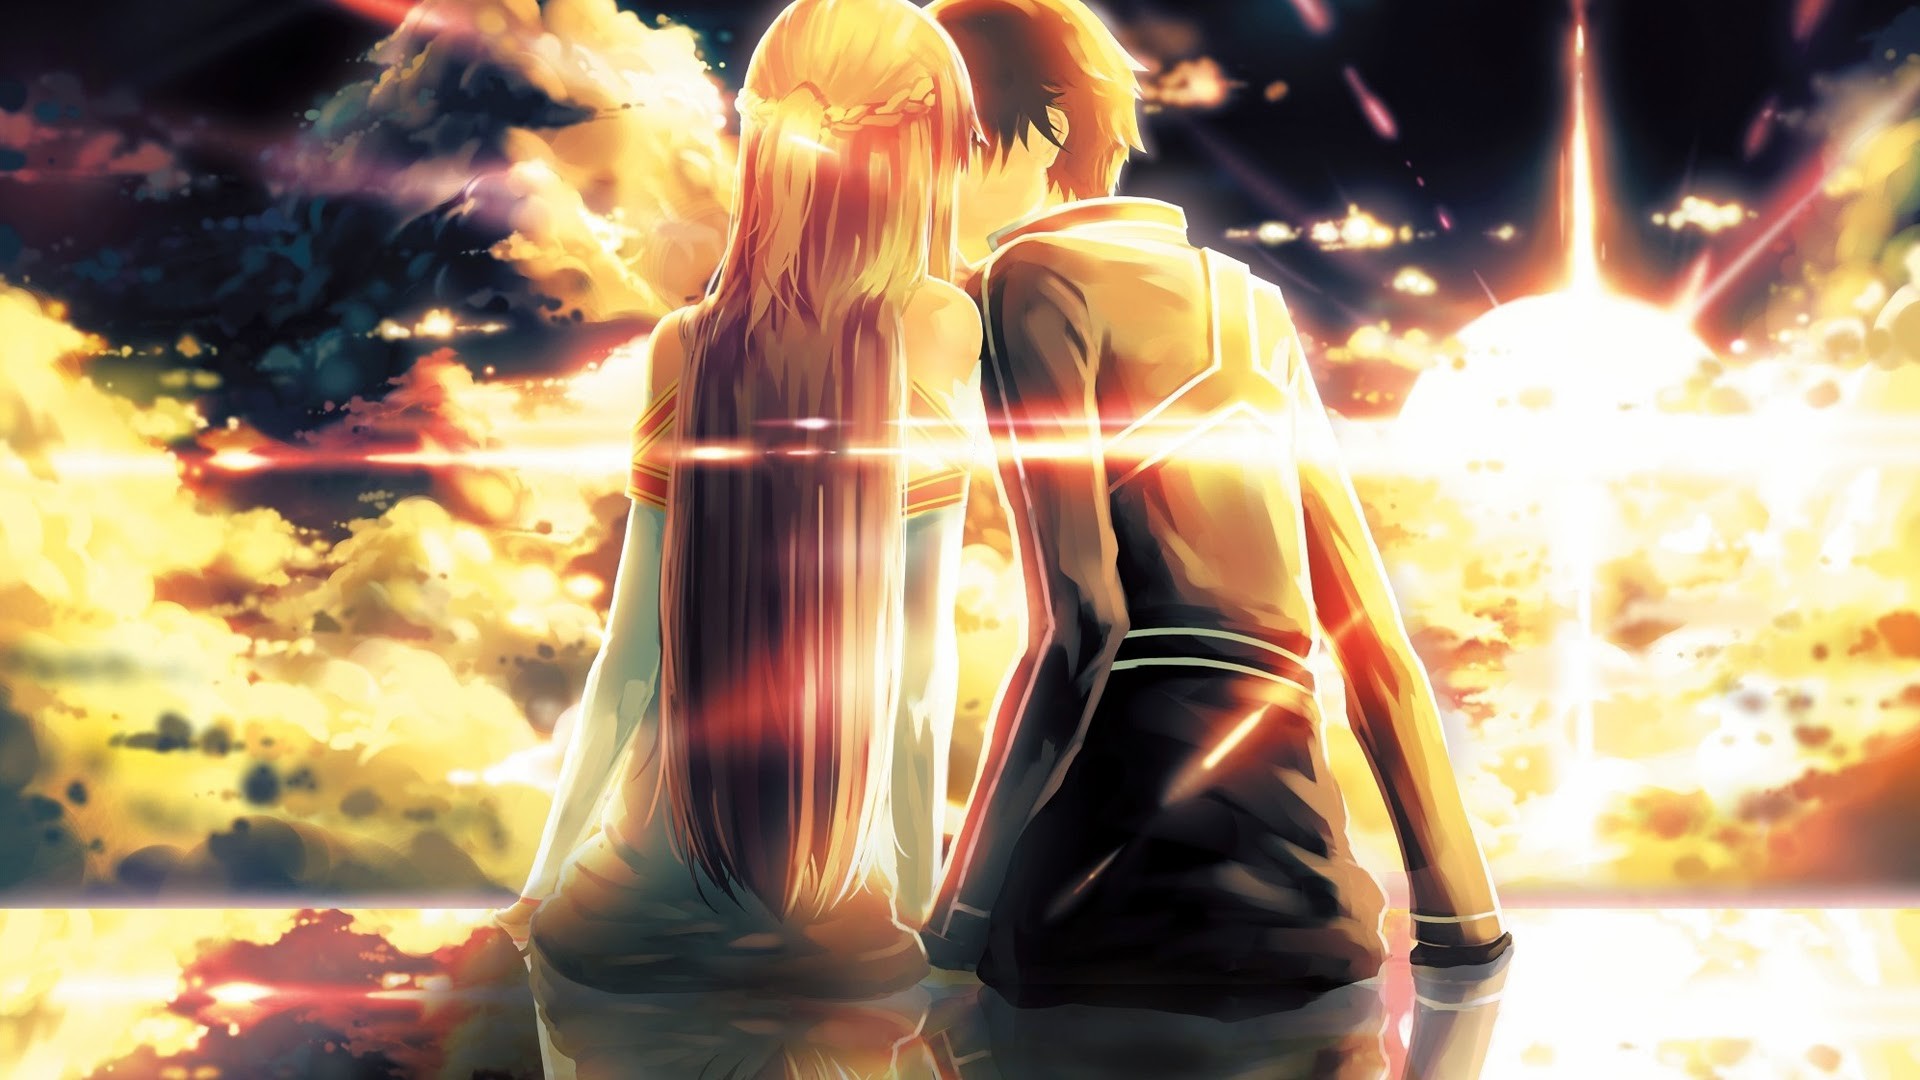 Cute Anime Couple Hd Wallpapers For Mobile